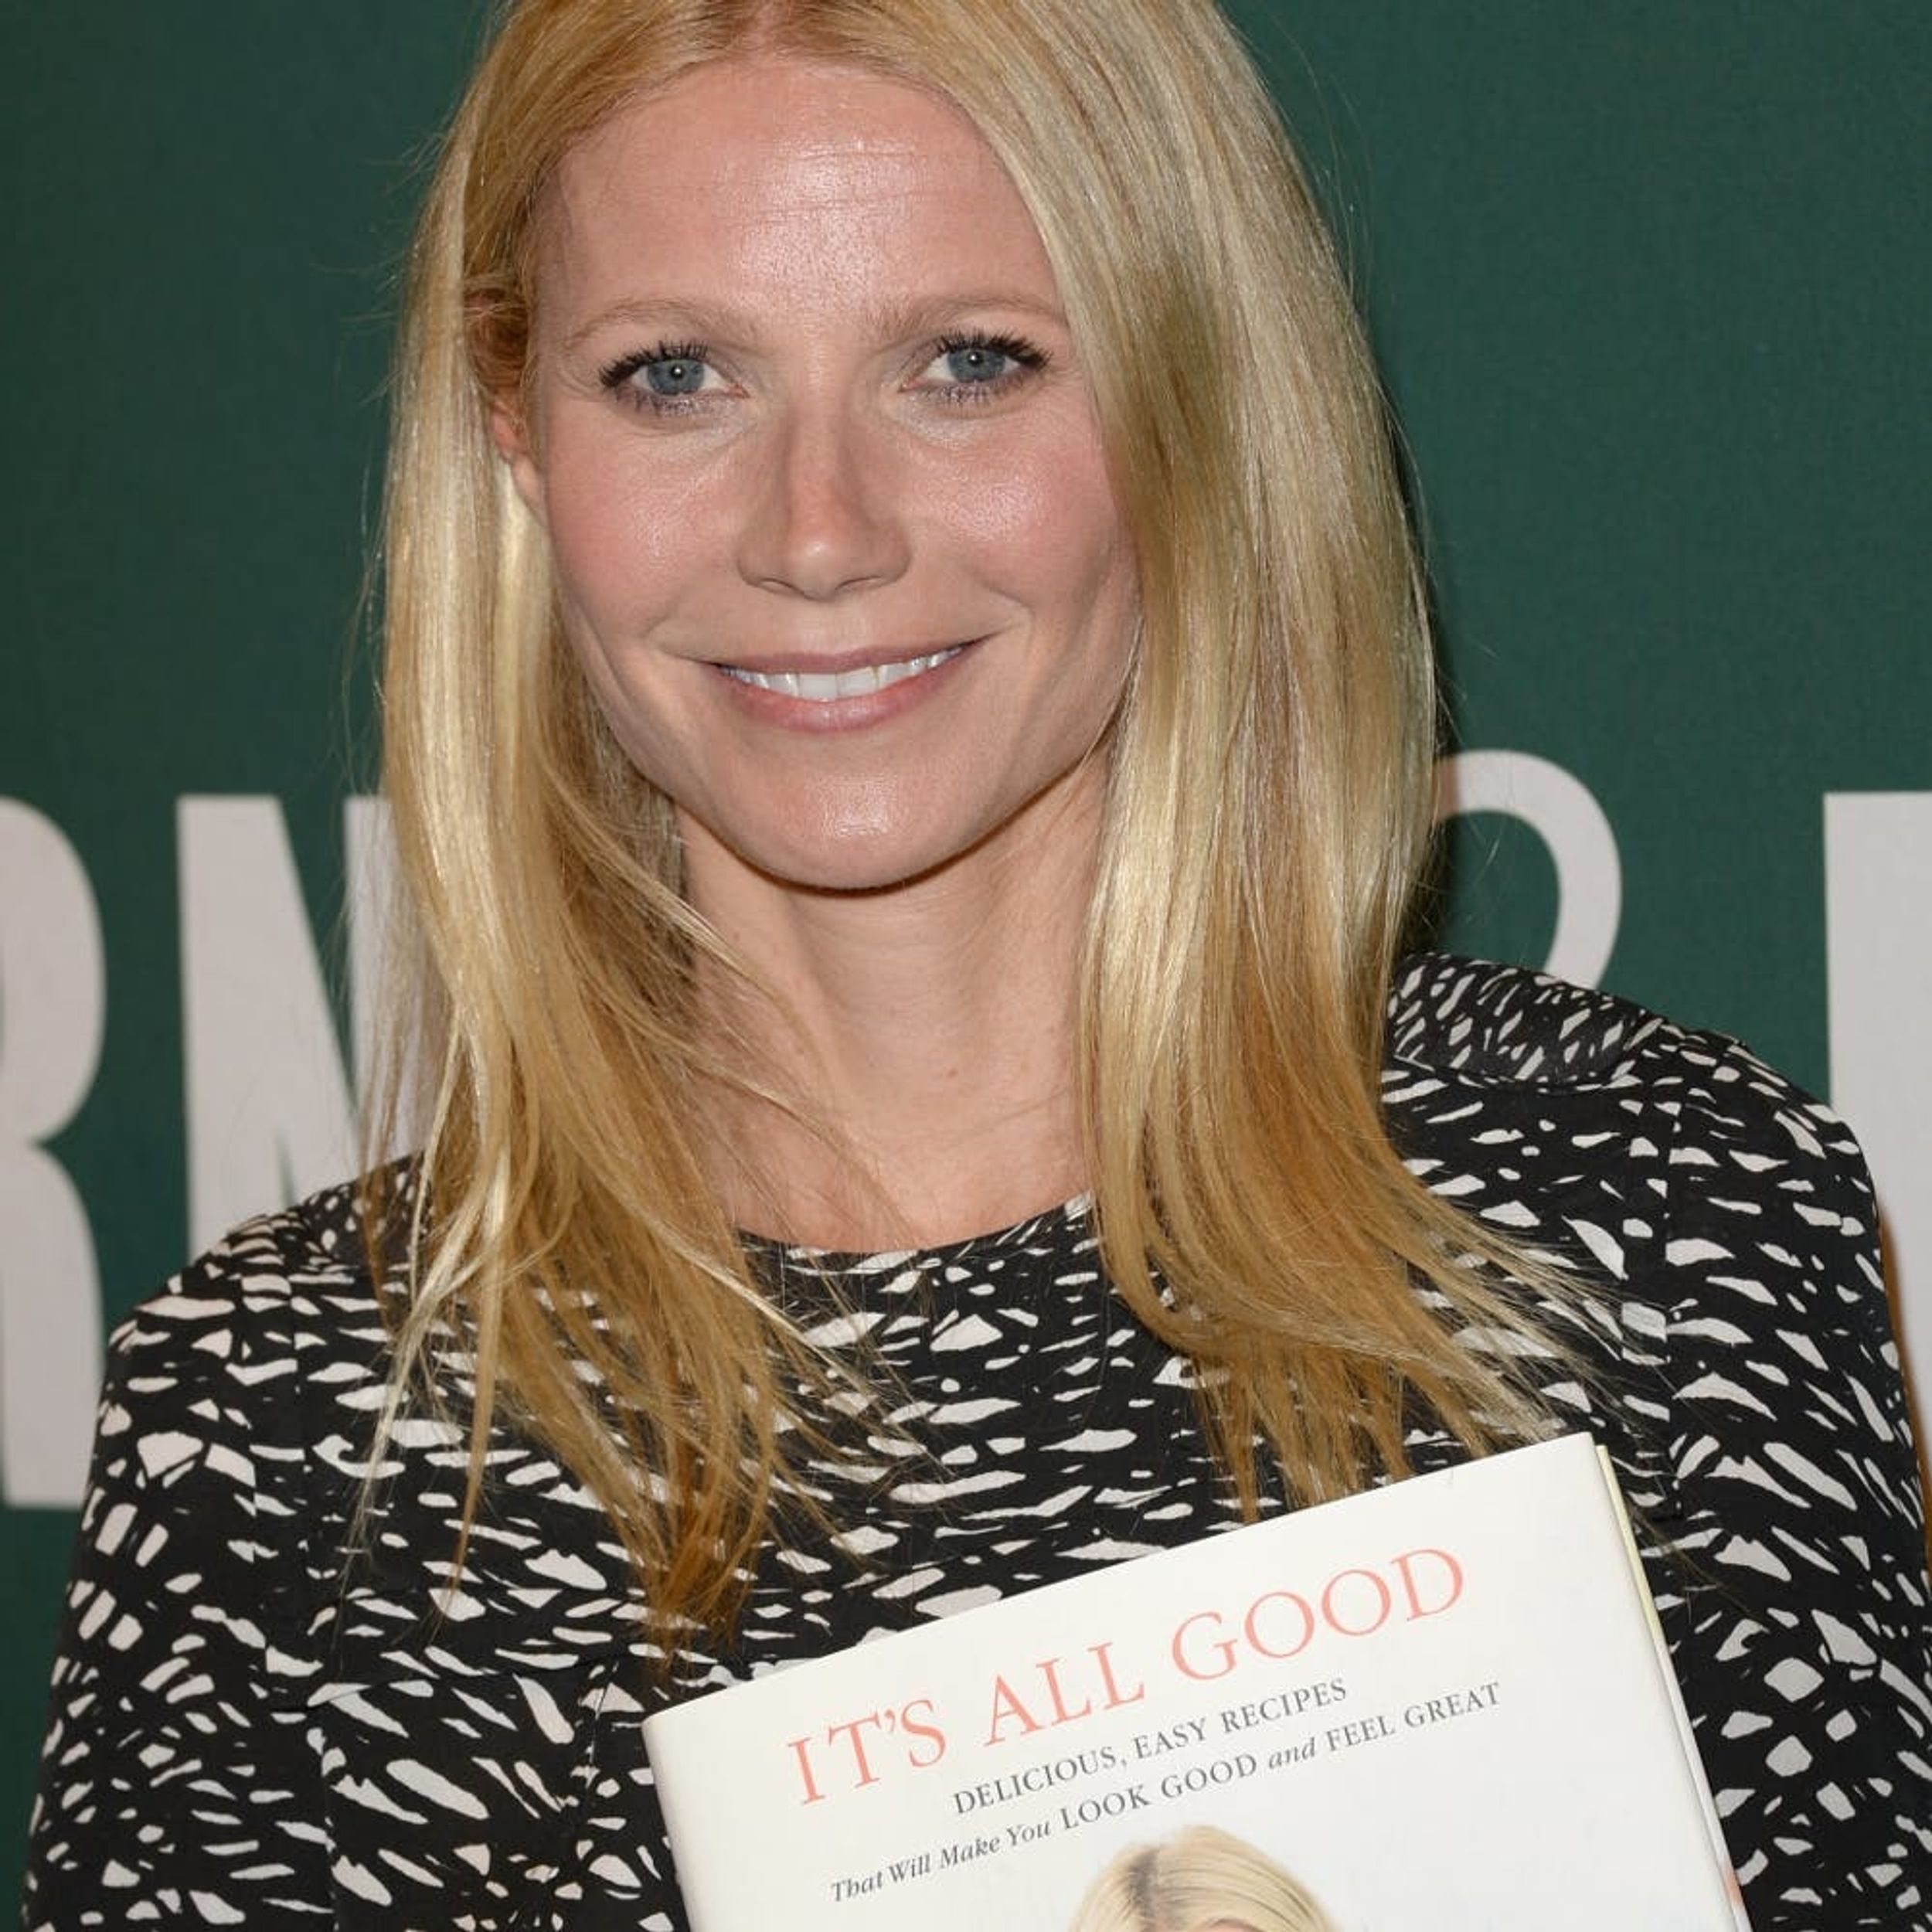 Gwyneth Paltrow’s Cookbook Recipes Could Make You Seriously Sick